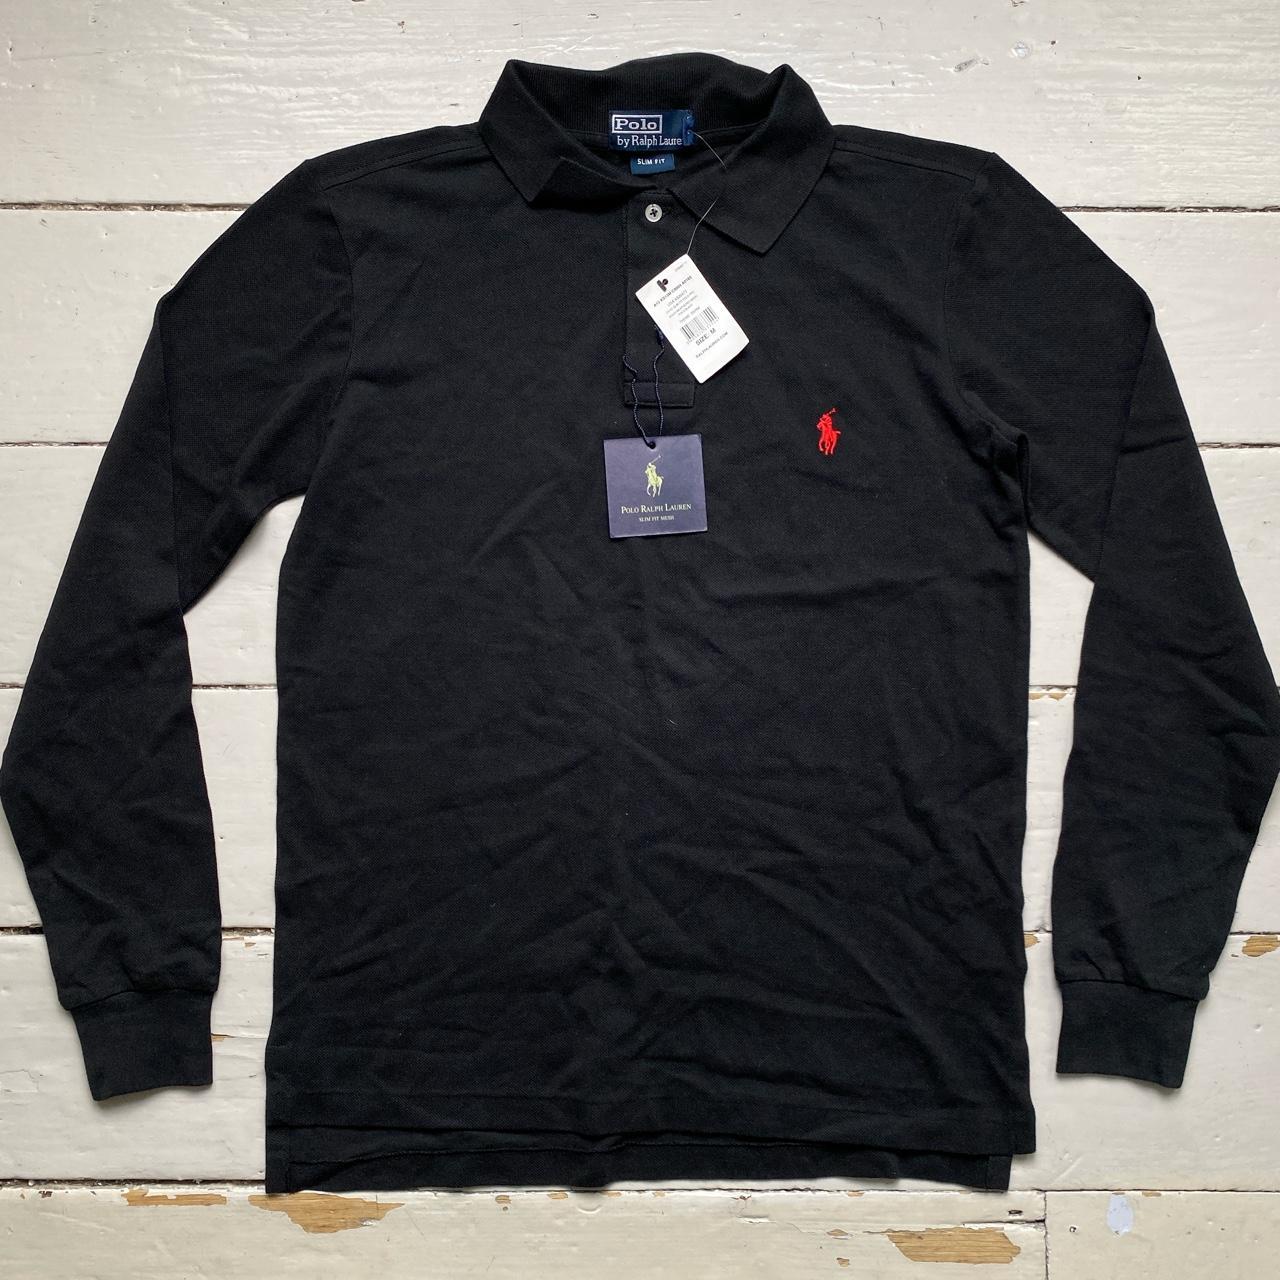 Polo Ralph Lauren Black and Red Long Sleeve Polo Shirt